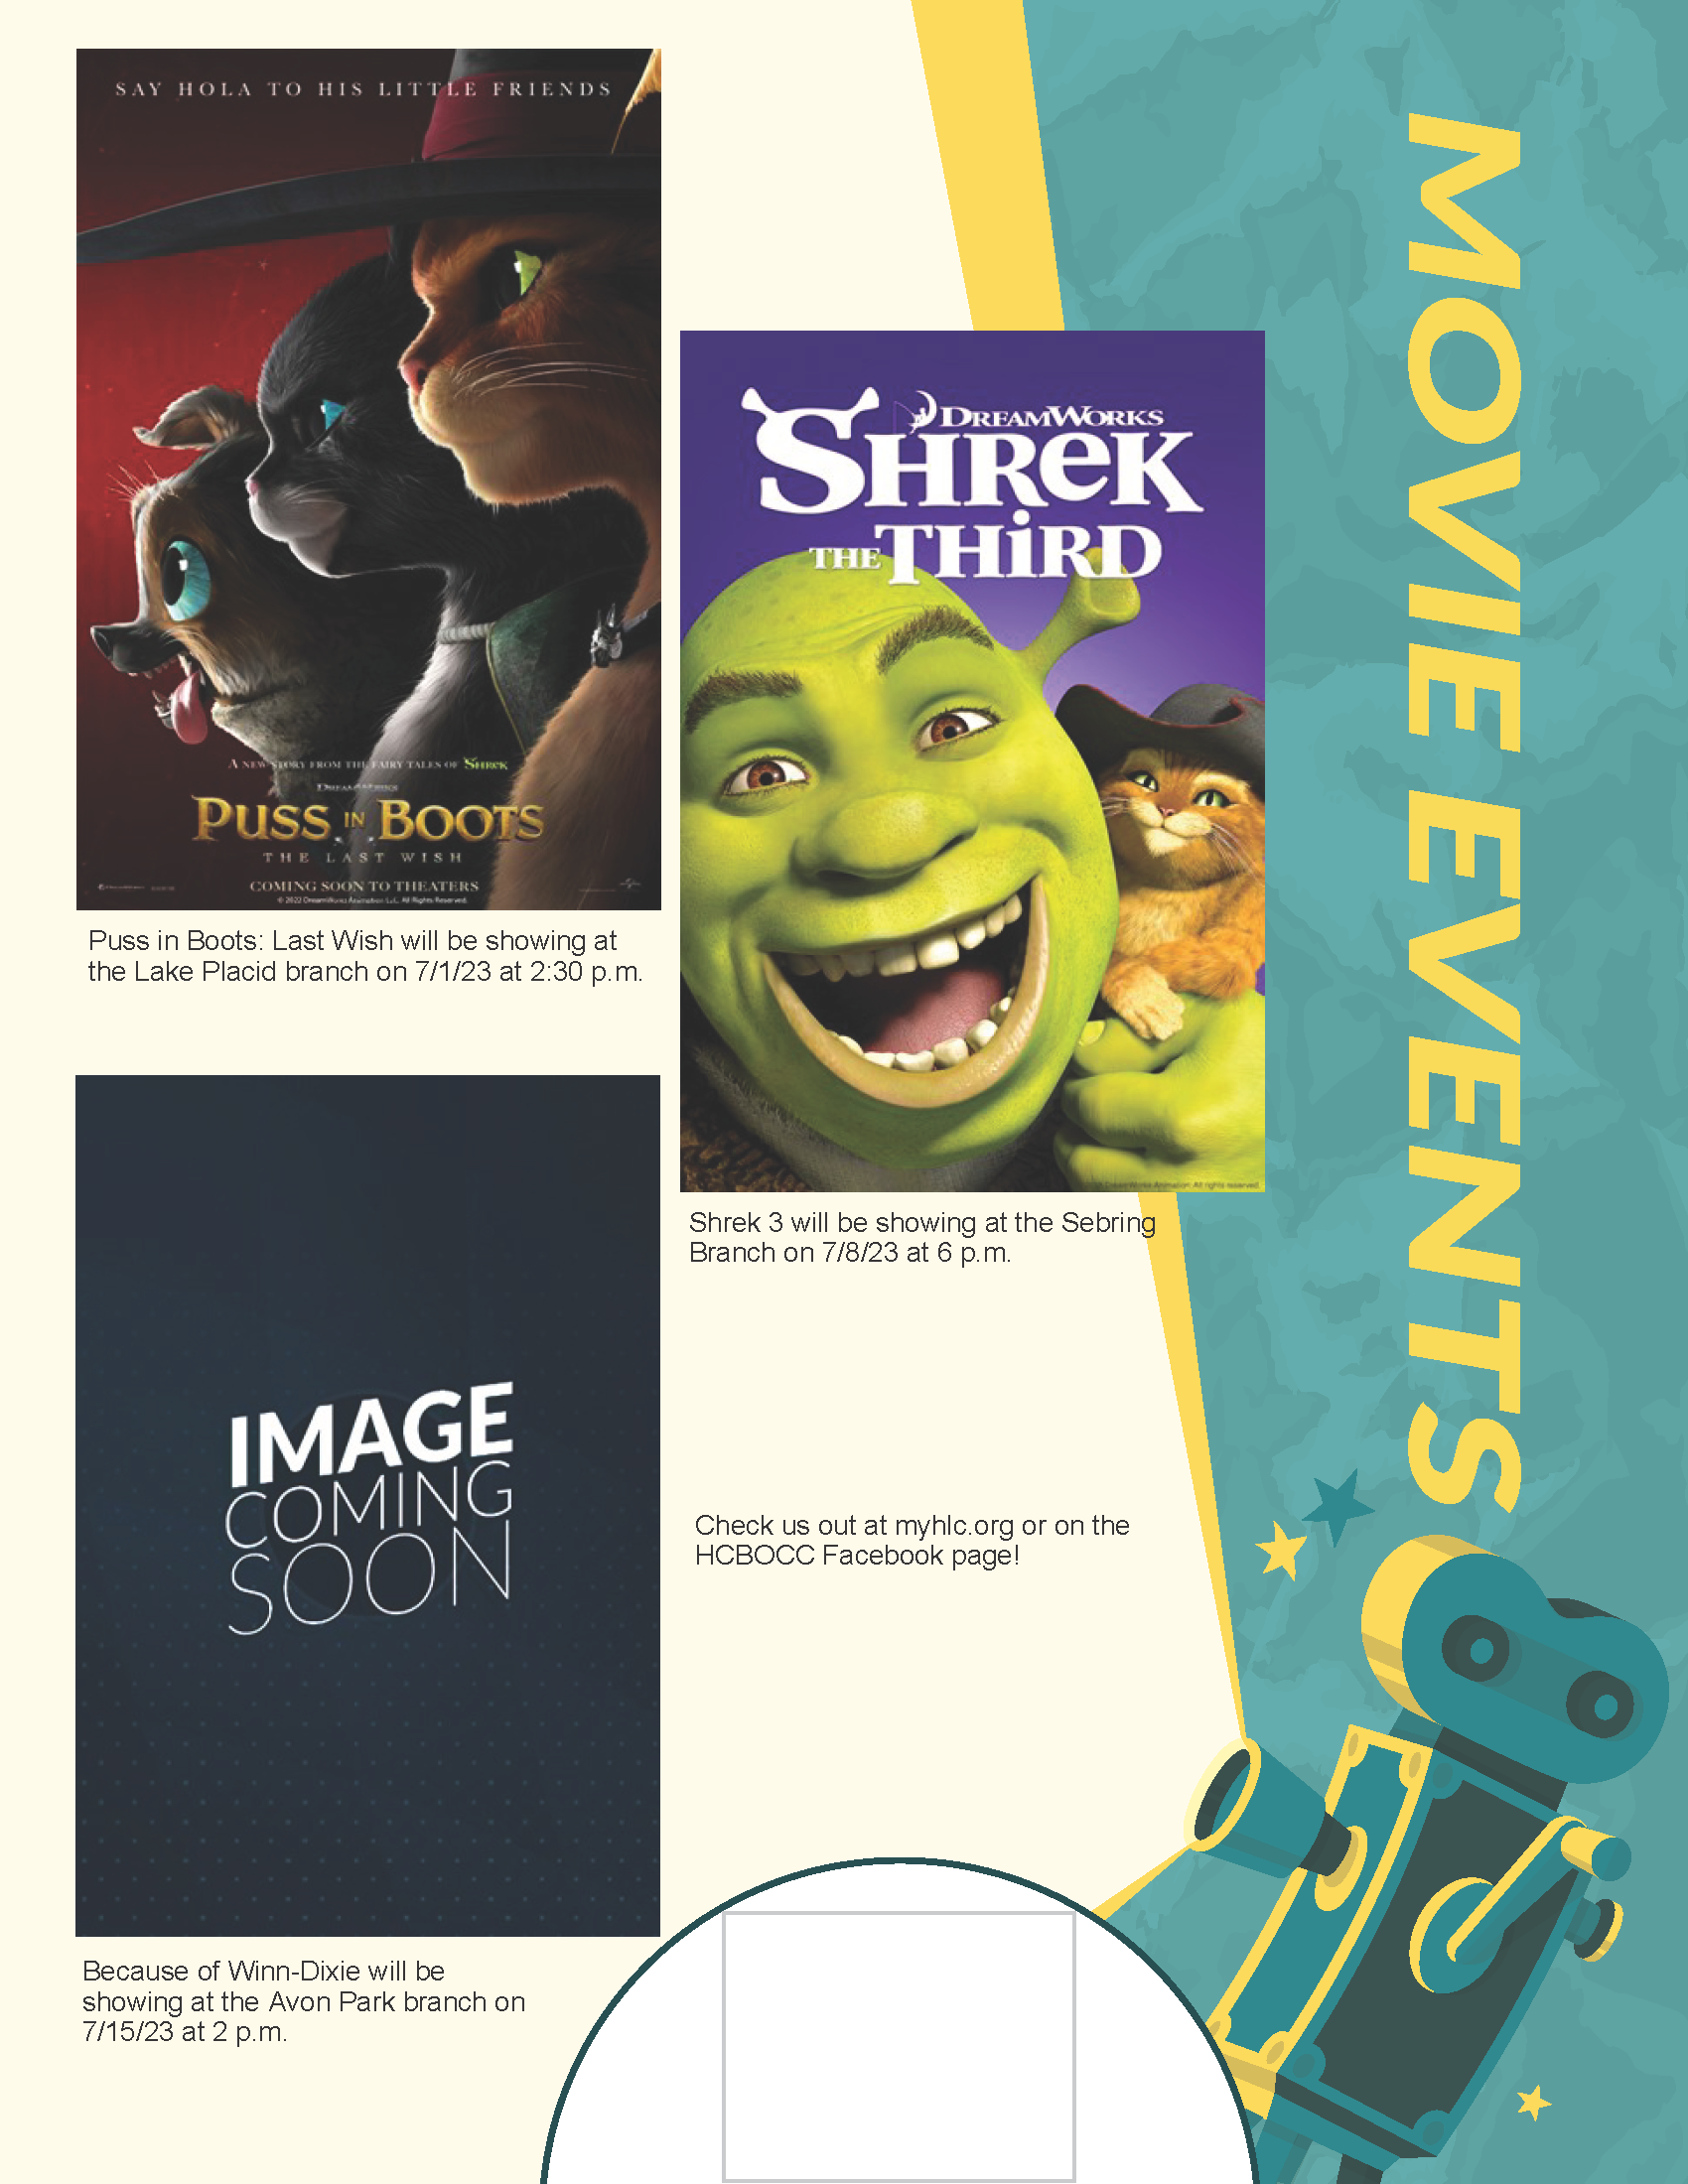 On Saturday, July 1, 2023 at 2:30 p.m., the Lake Placid Memorial Library will host a showing of Puss in Boots: Last Wish, rated PG. On Saturday, July 8, 2023 at 6 p.m., the Sebring Public Library will be Shrek the Third or Shrek 3, rated PG. On Saturday, July 15 at 2 p.m., the Avon Park Public Library will be showing Because of Winn-Dixie, rated PG